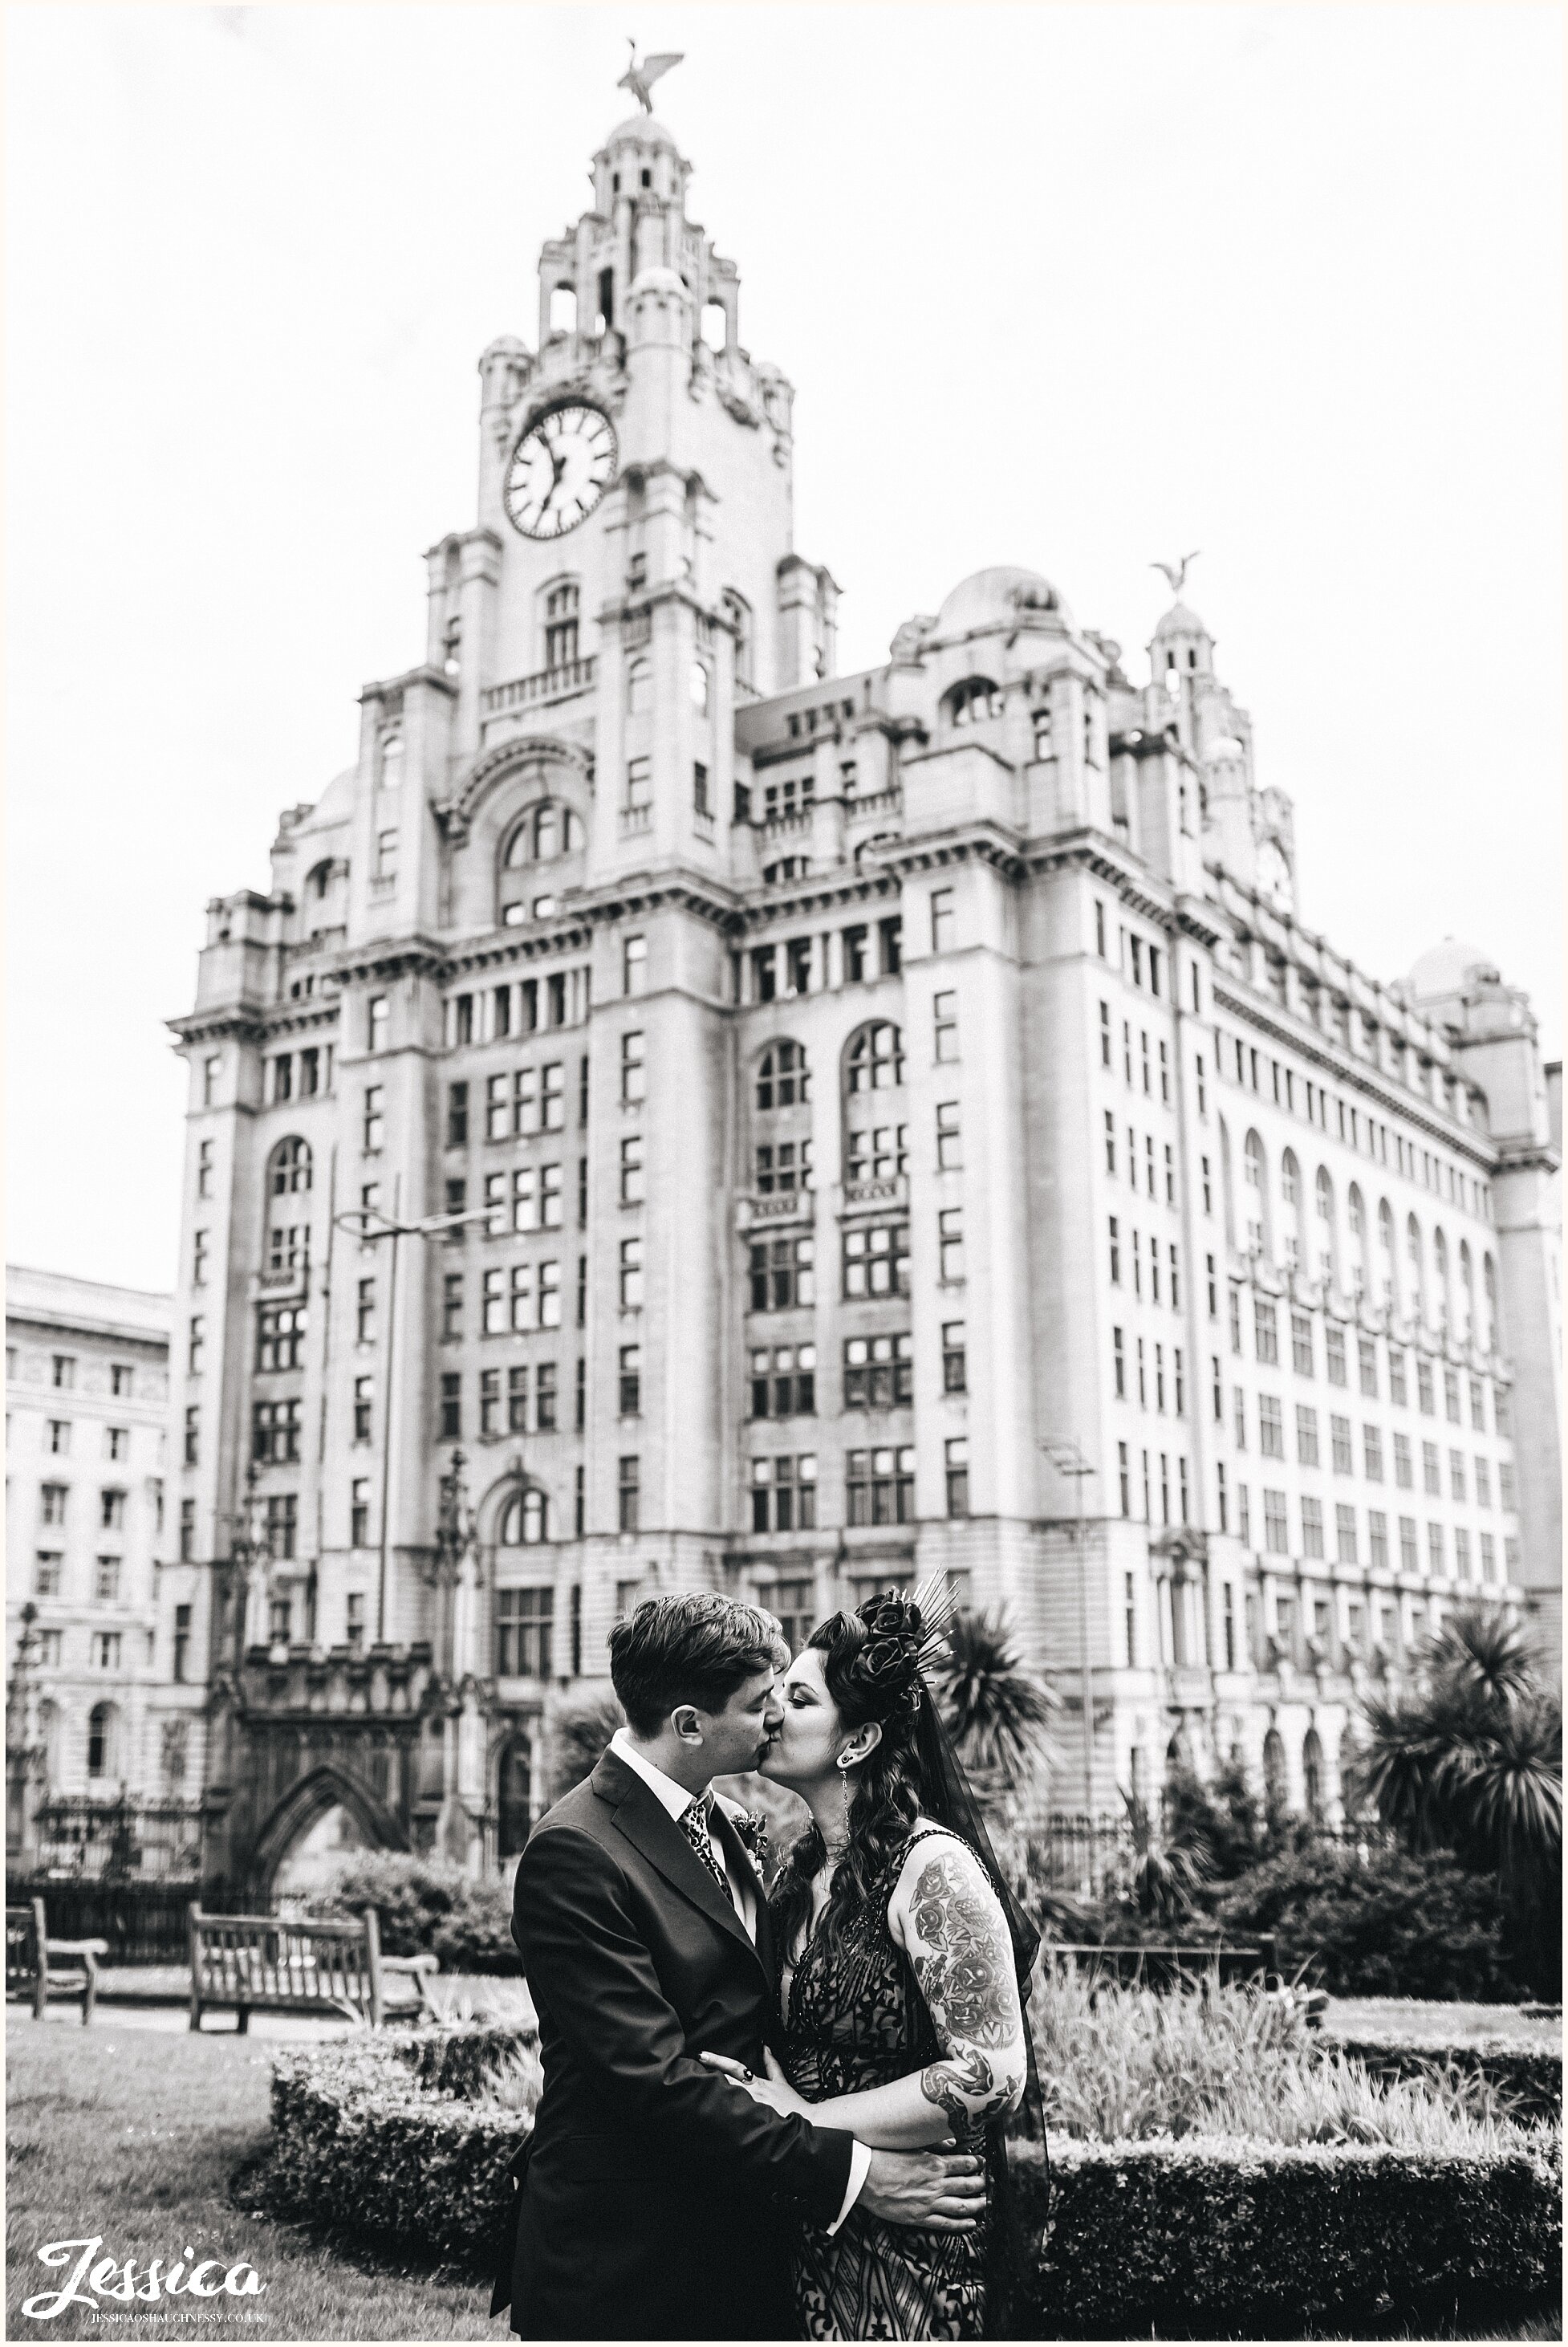 alternative couple kiss in front of liver building in liverpool